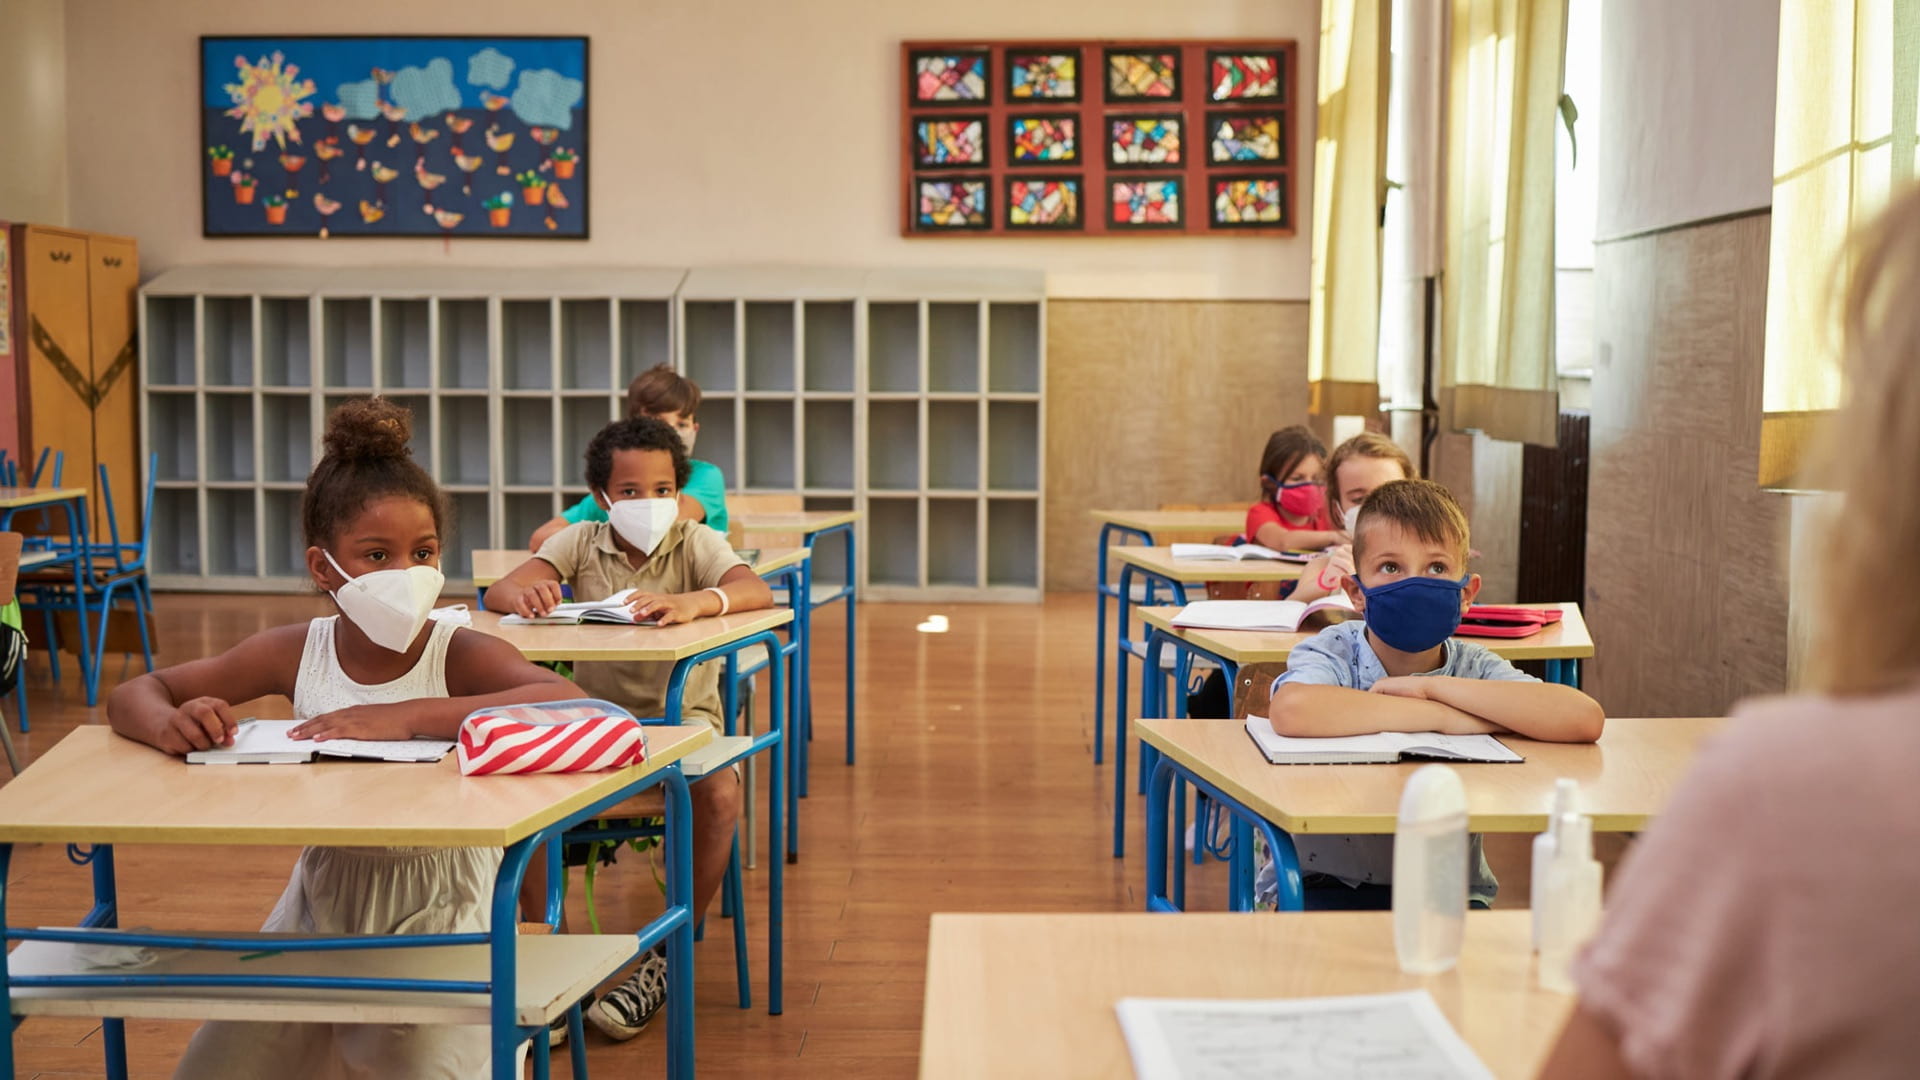 Group of elementary children studying with a teacher at school during coronavirus pandemic